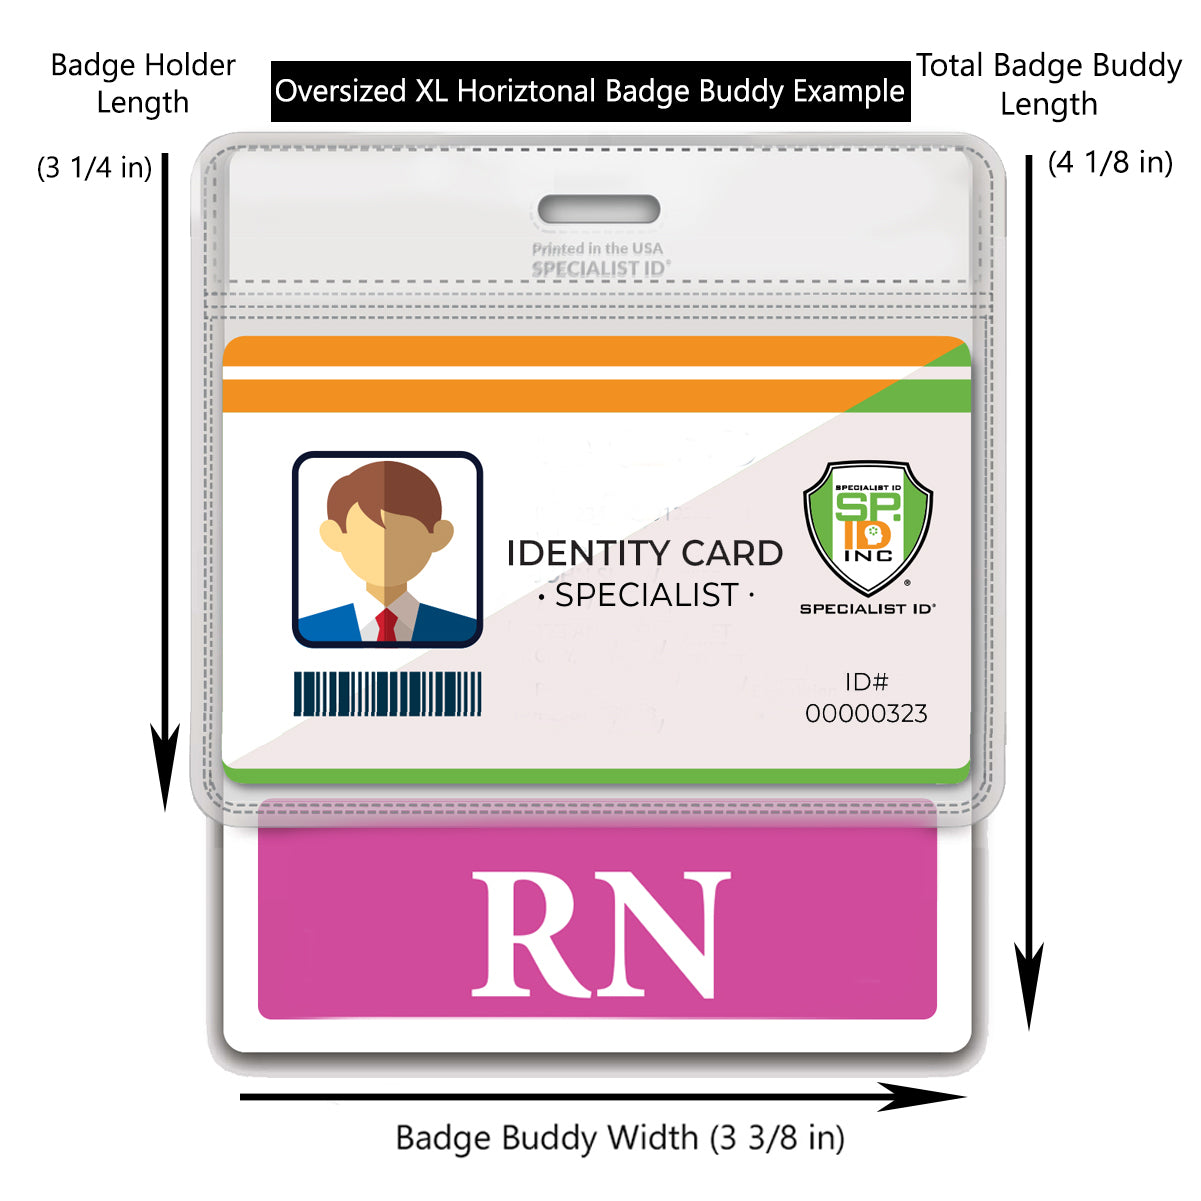 An Extra Large RN Badge Buddy - XL Badge Backer for Registered Nurse - Horizontal Hospital ID Badge Buddies for a specialist is displayed in an enlarged, horizontal holder with another badge underneath labeled "RN." Measurements for length and width are marked around the holder.